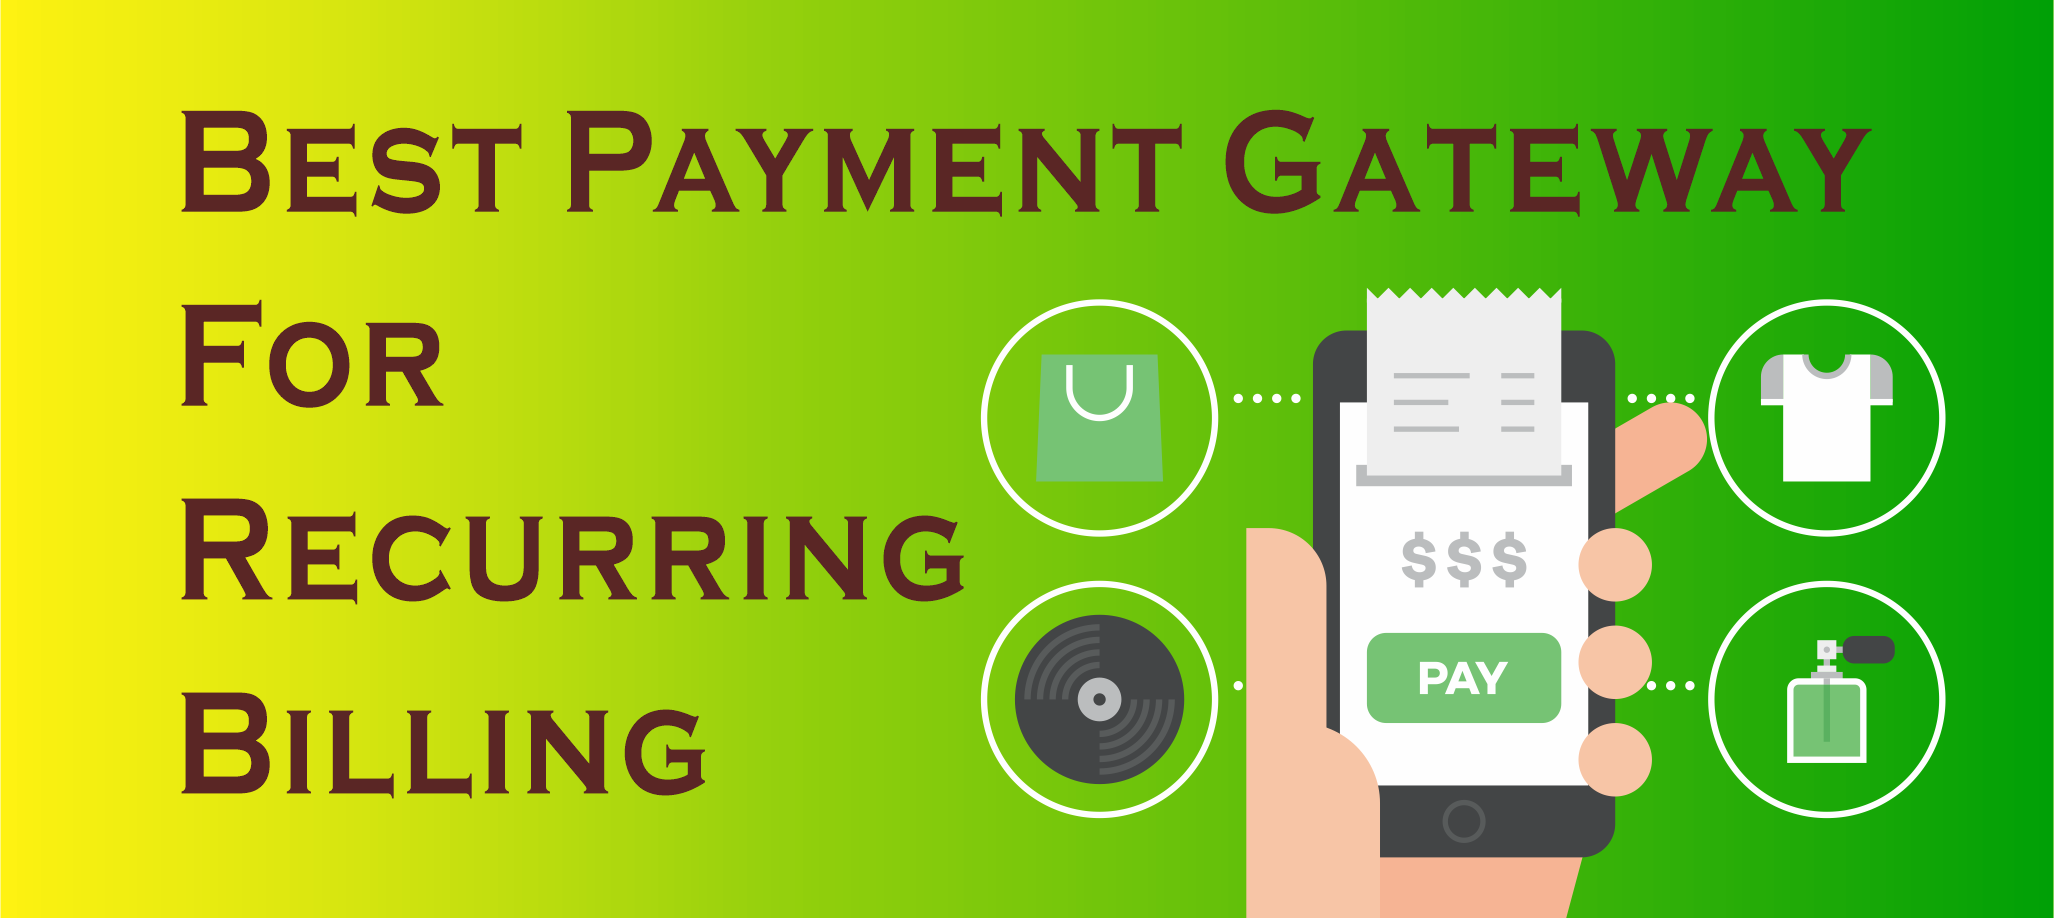 best payment gateway for recurring billing